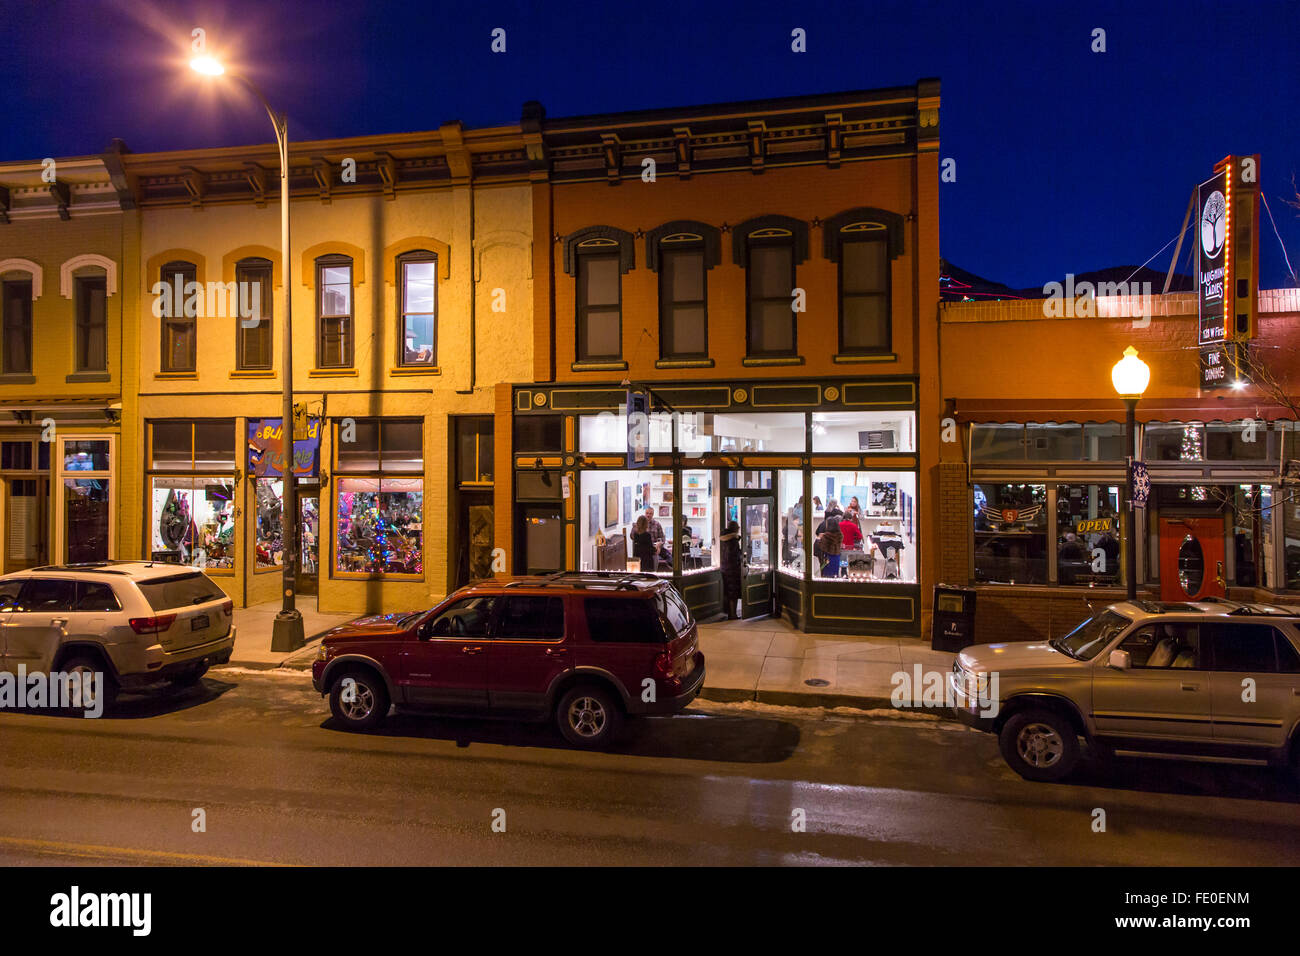 Night view of artist gallery opening event in small mountain town of Salida, Colorado, USA Stock Photo